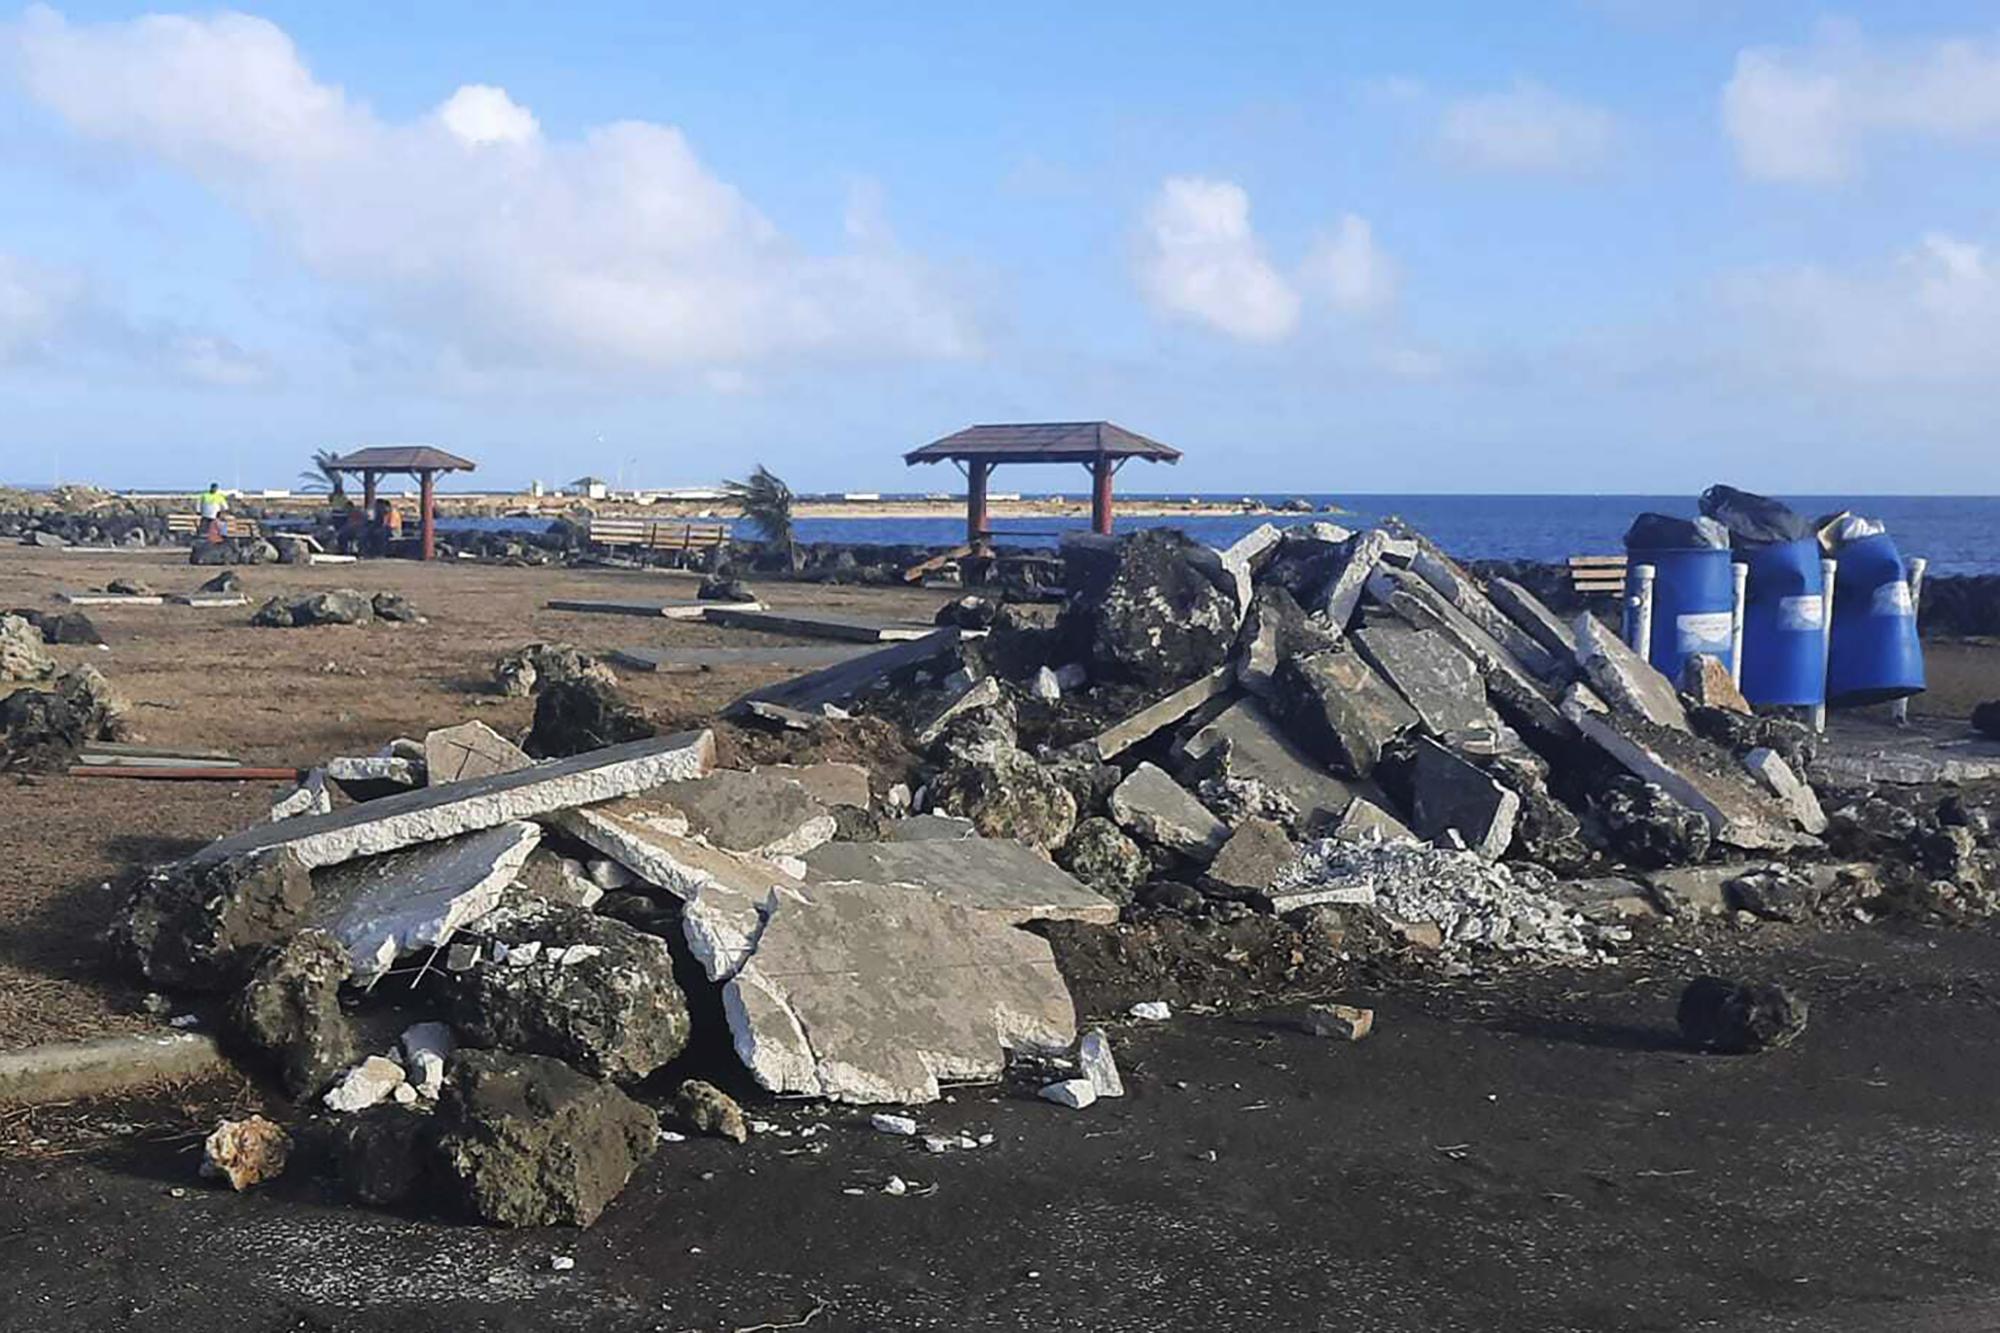 First aid flights arrive in Tonga after big volcano eruption – Associated Press